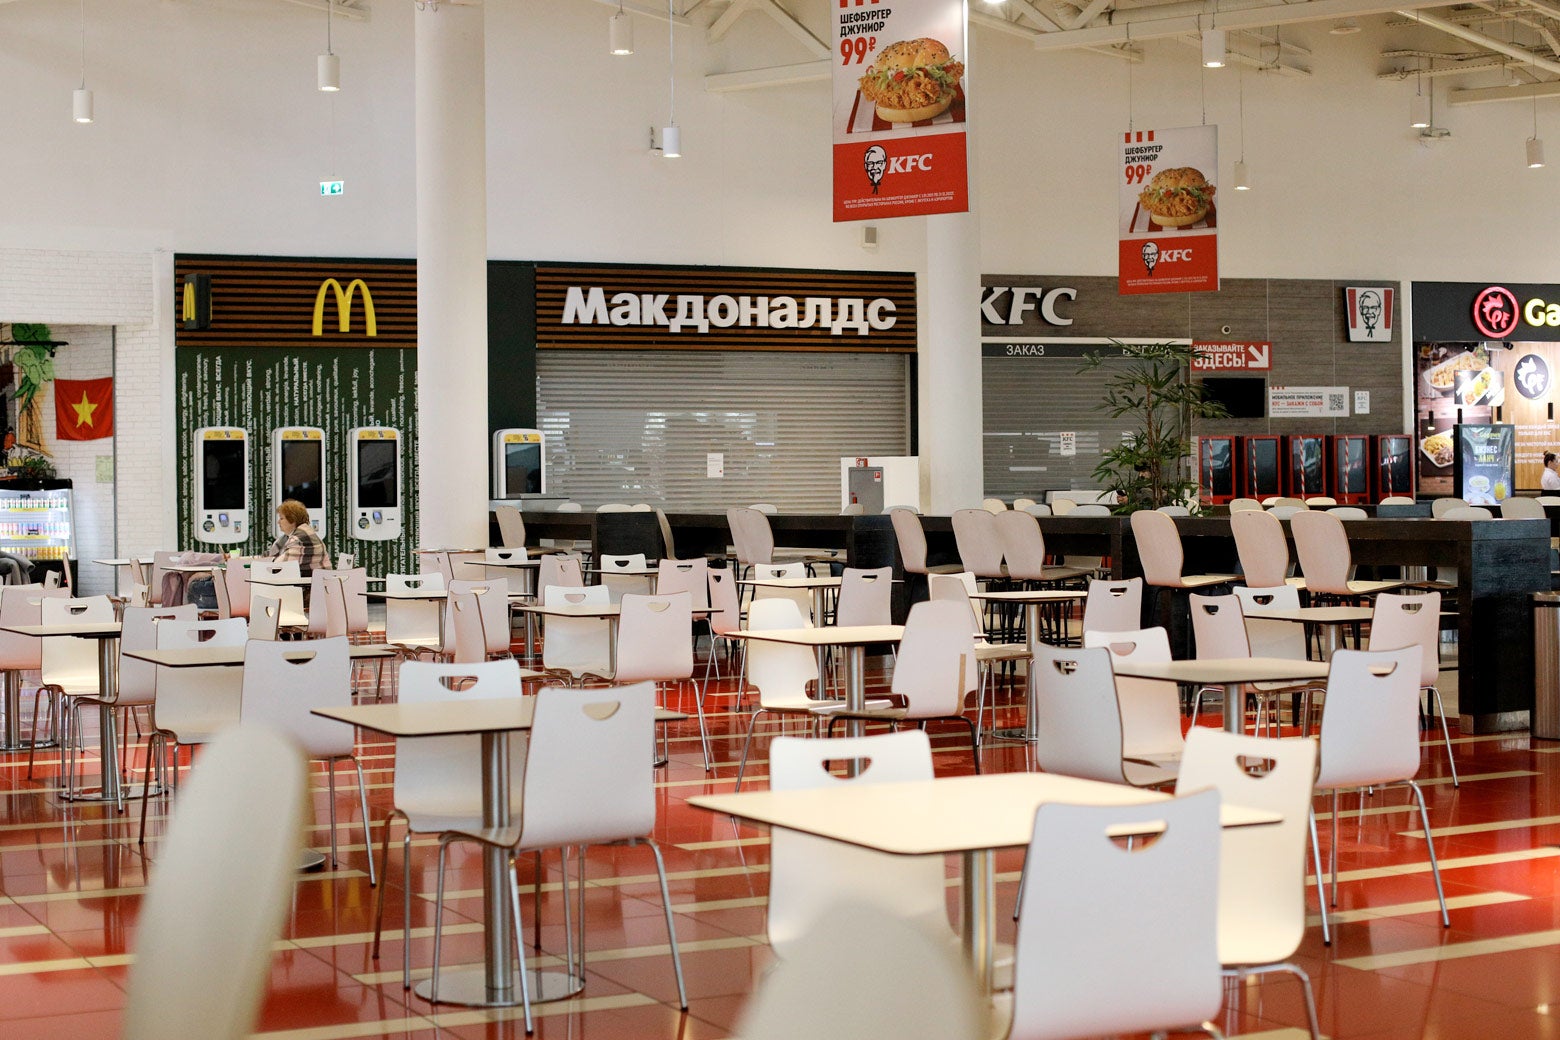 Rows of empty tables and chairs in a food court